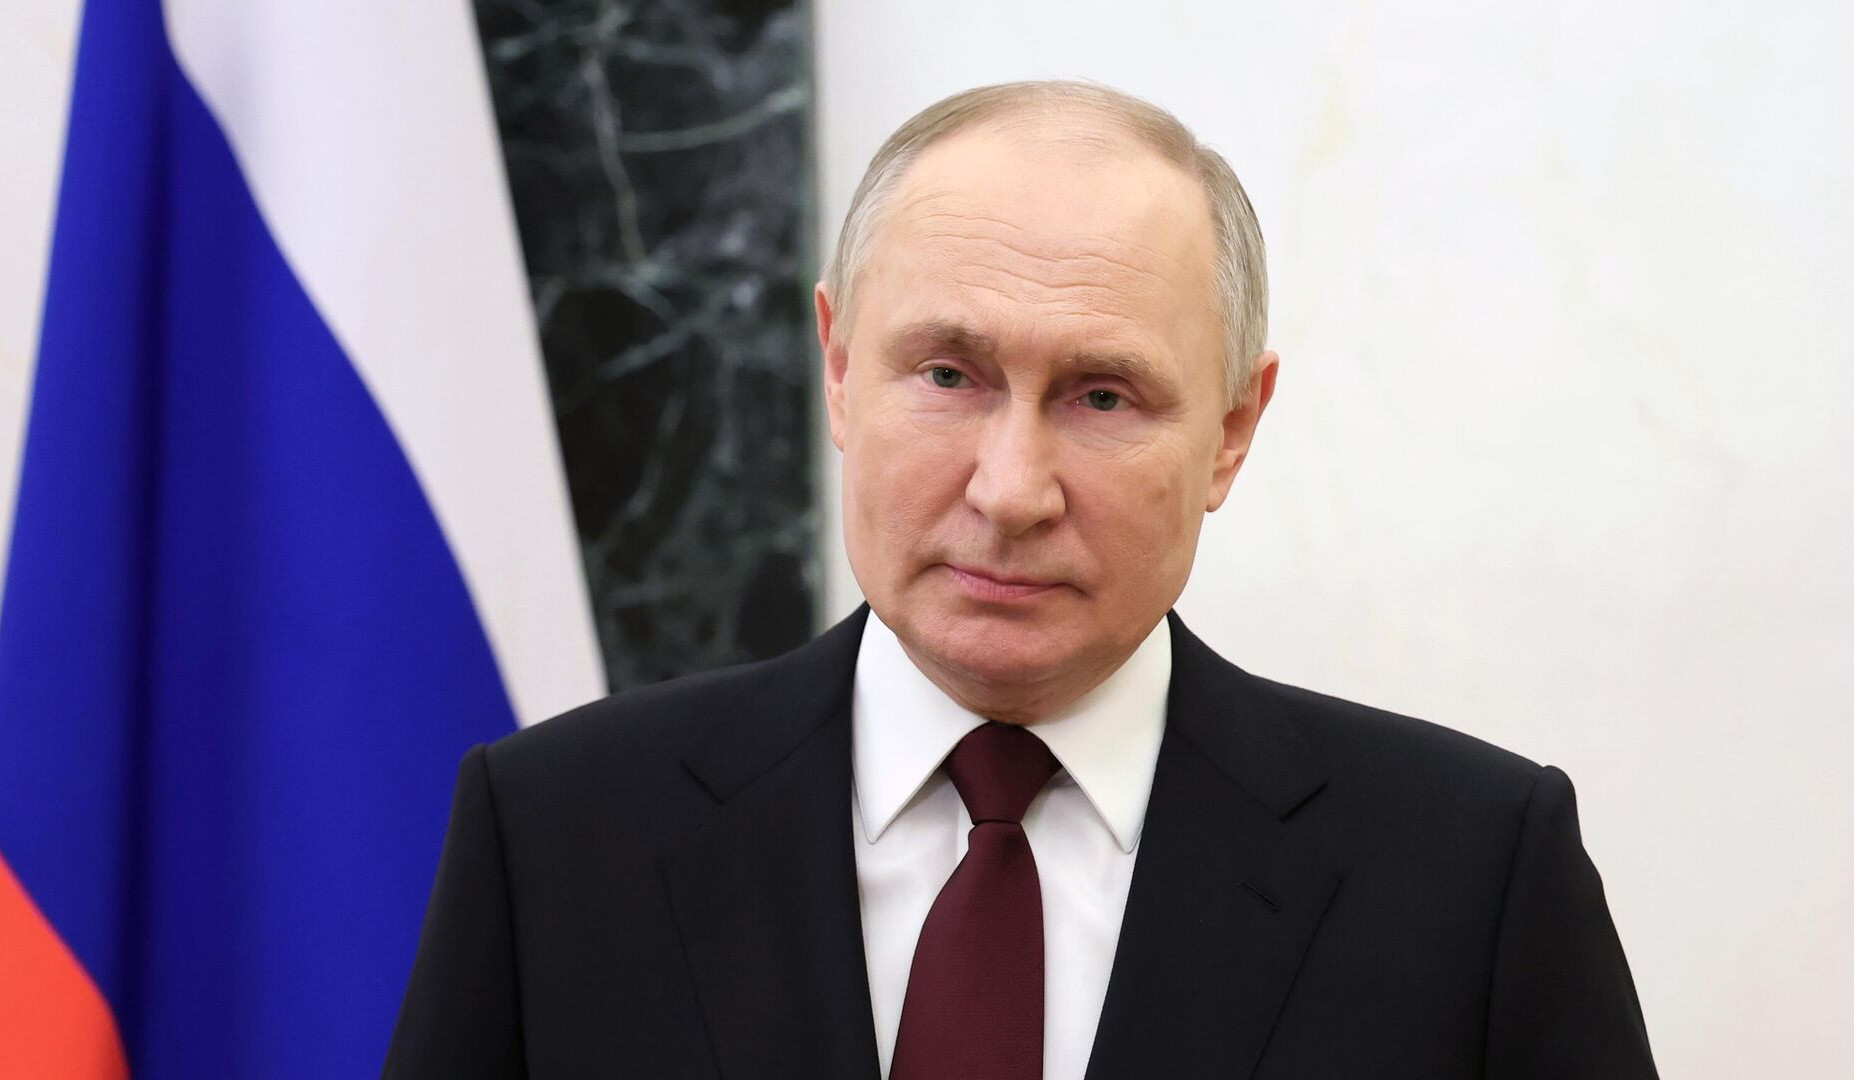 Putin declares March 24 day of nationwide mourning